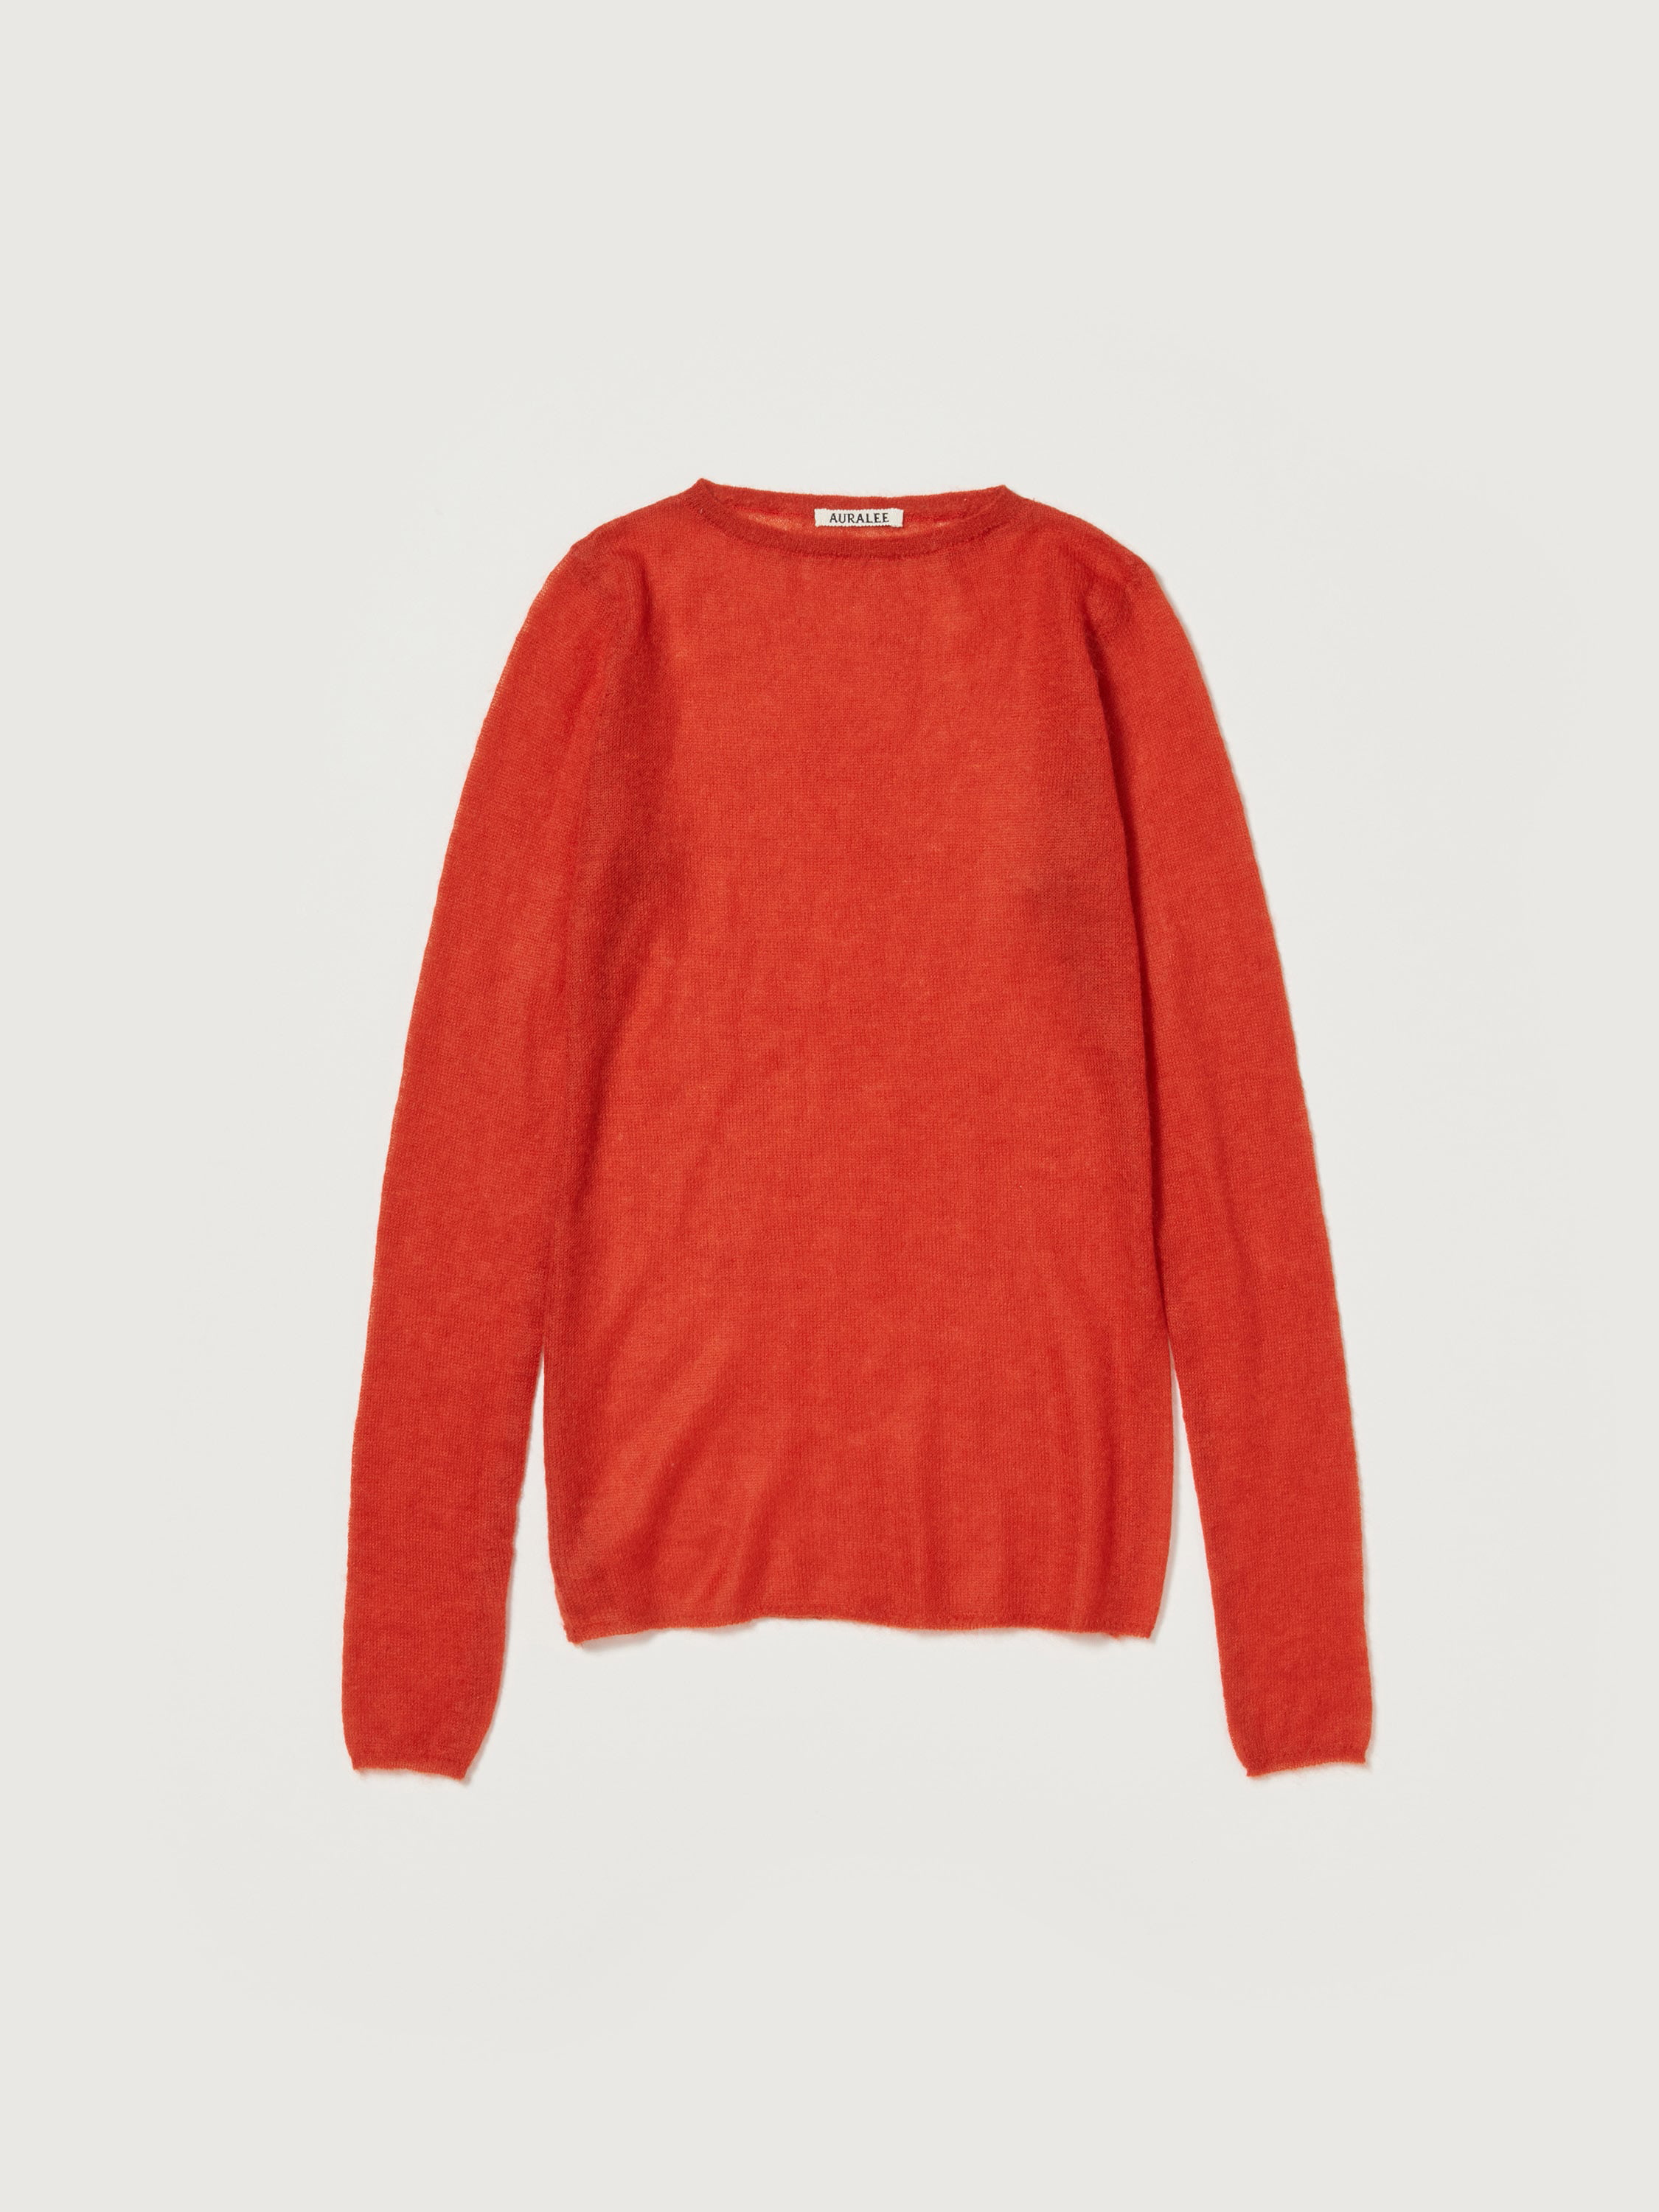 KID MOHAIR SHEER KNIT BOAT NECK P/O 詳細画像 RED 1